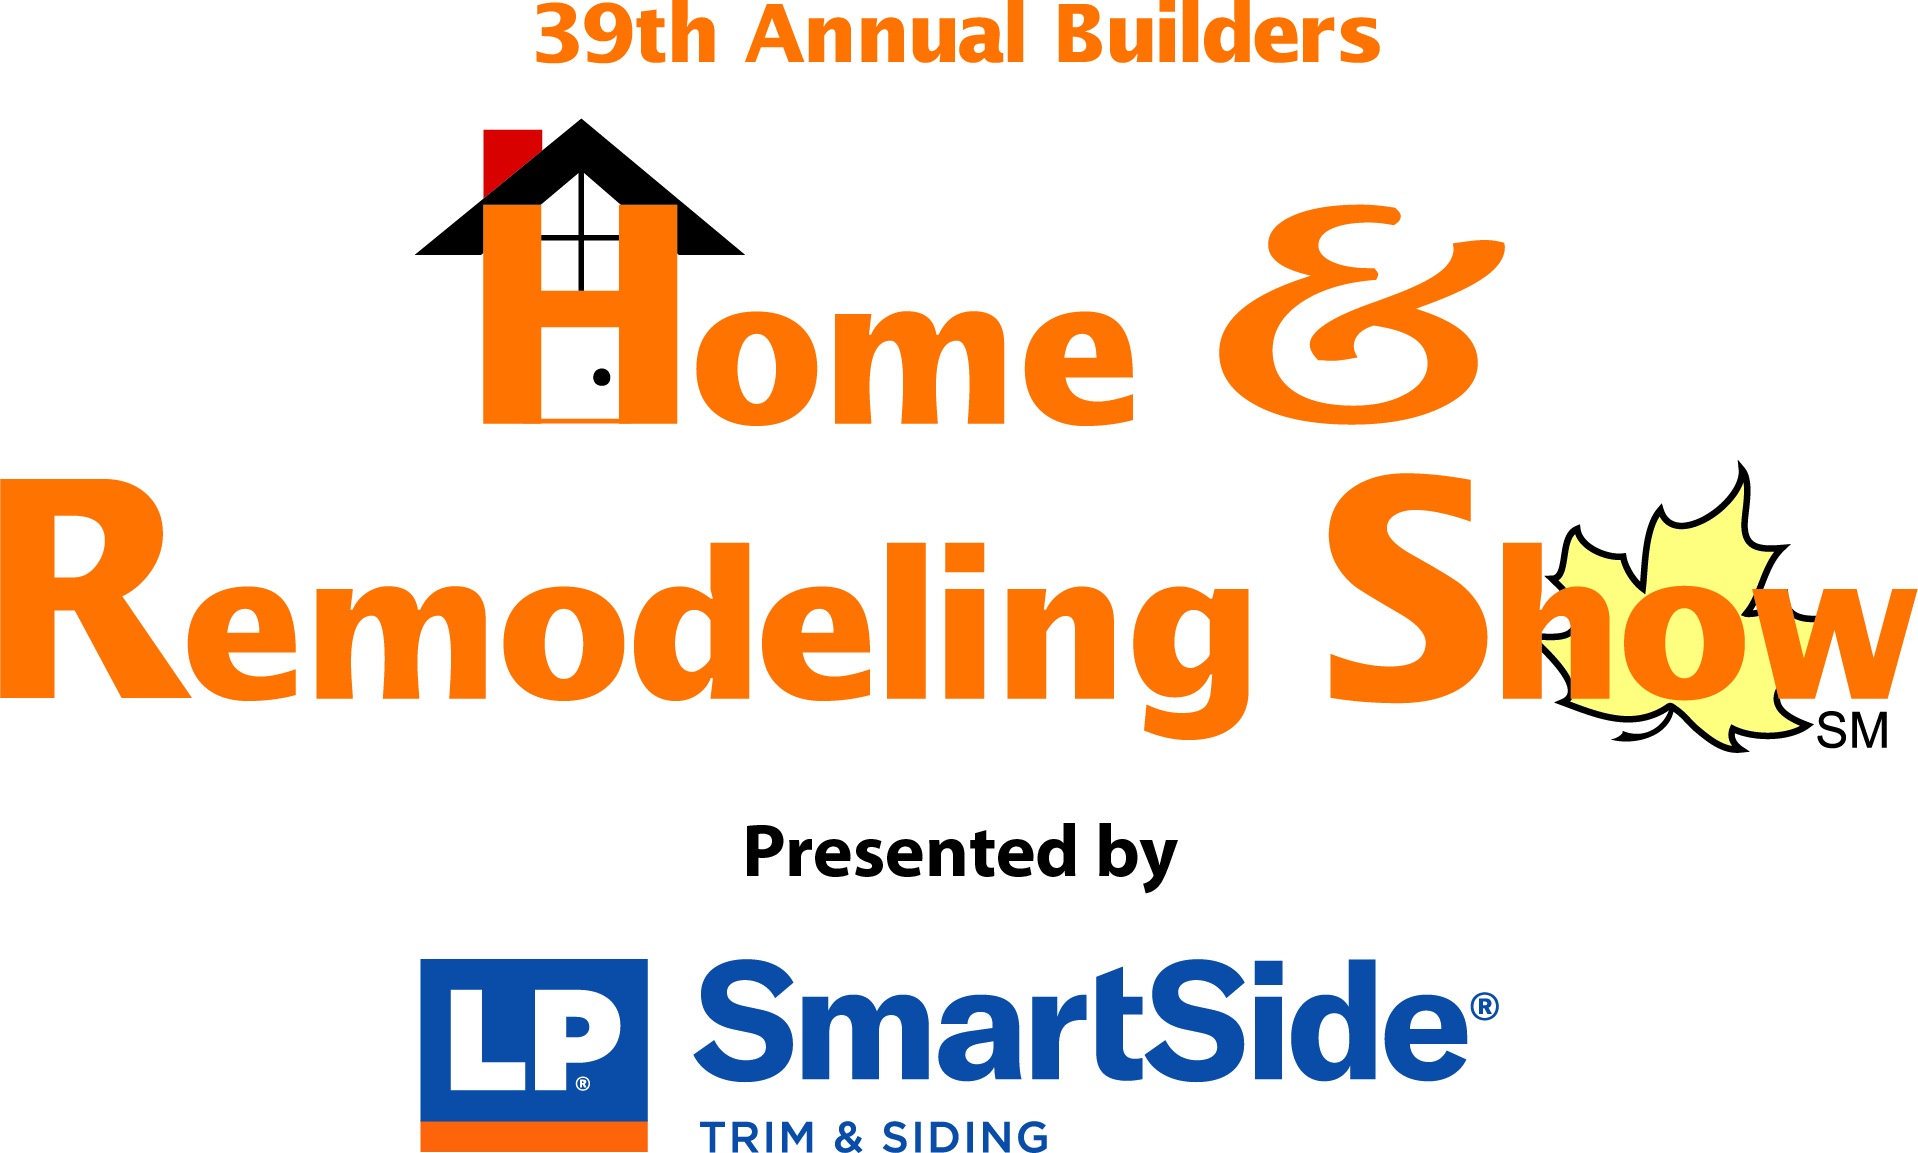 39th Annual Builders Home & Remodeling Show, Presented by LP SmartSide Trim & Siding